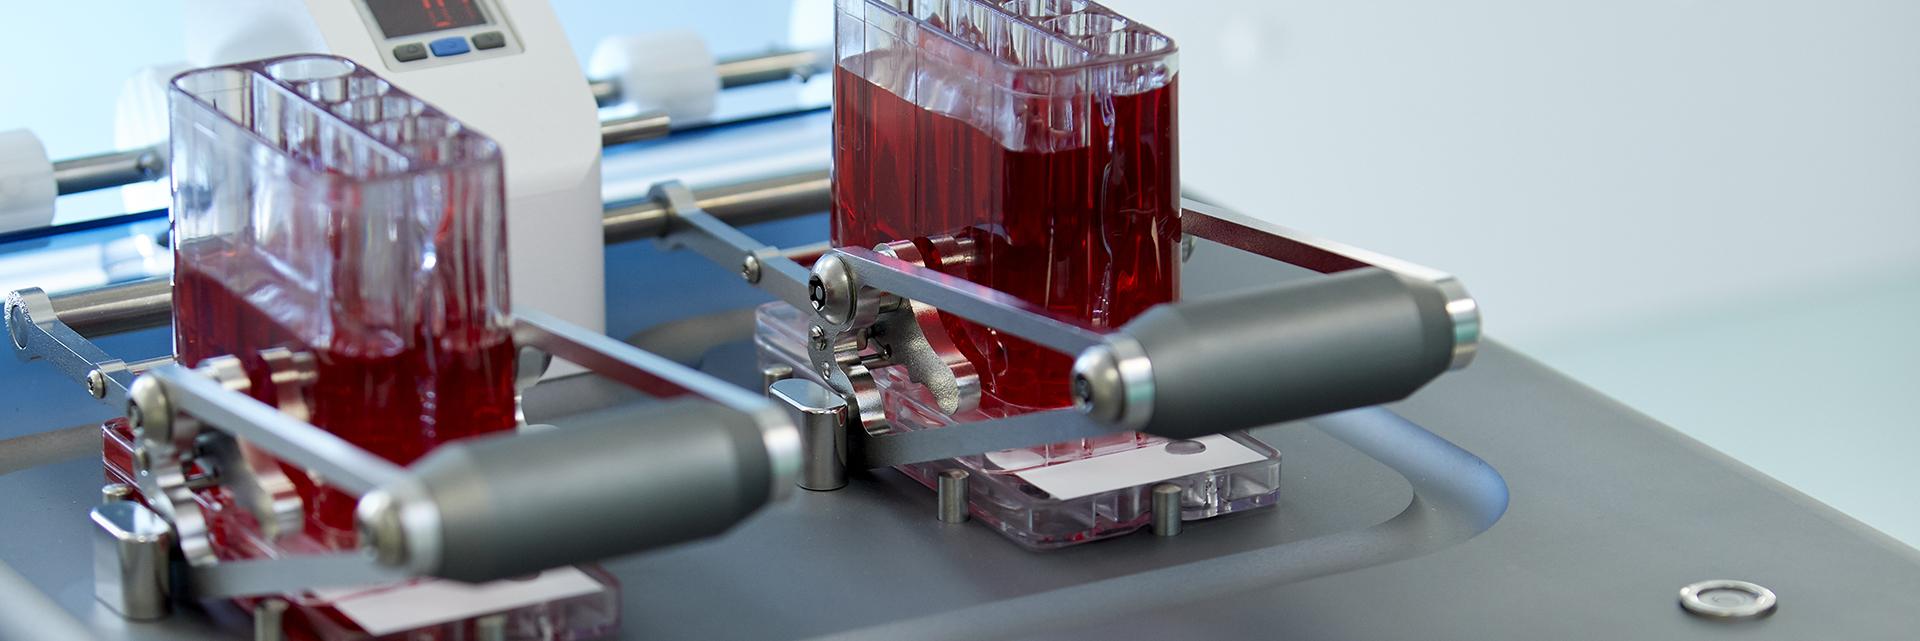 Blood samples on a medical device